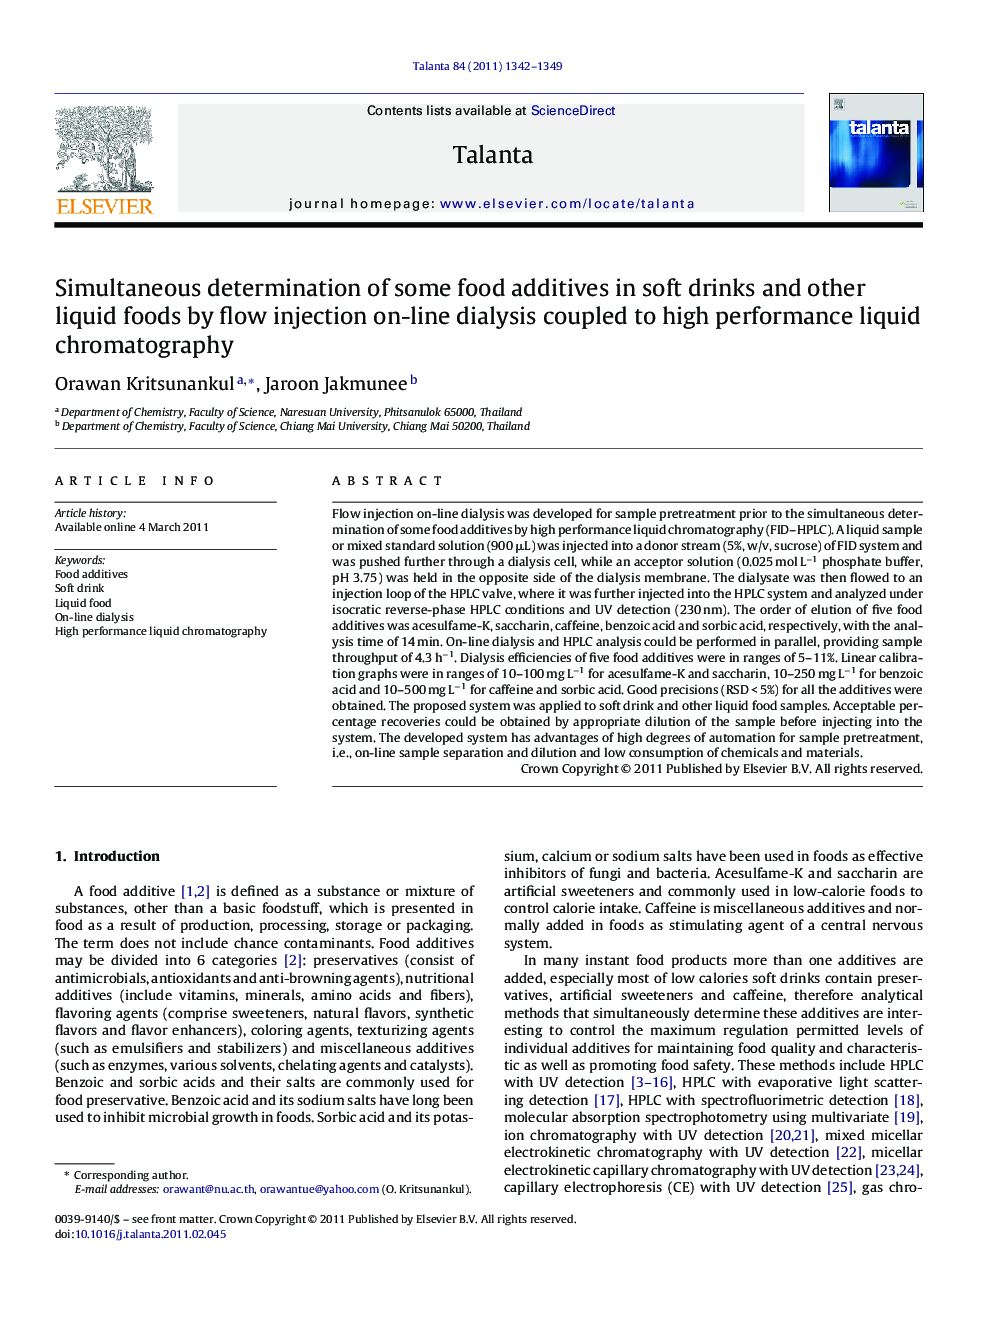 Simultaneous determination of some food additives in soft drinks and other liquid foods by flow injection on-line dialysis coupled to high performance liquid chromatography